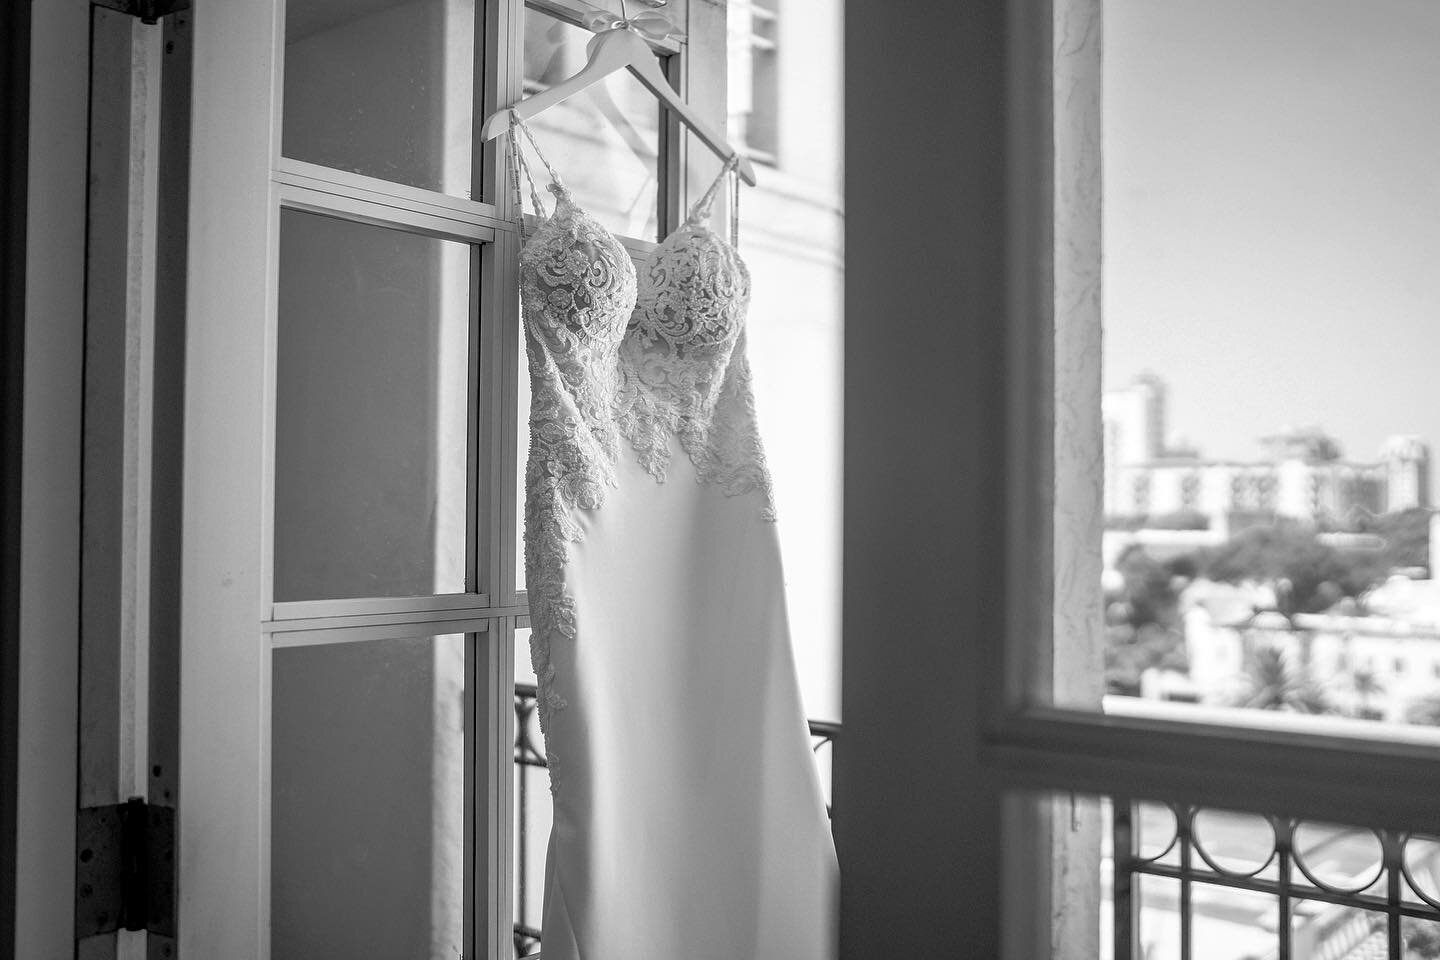 Her wedding dress with the best views on a special day.